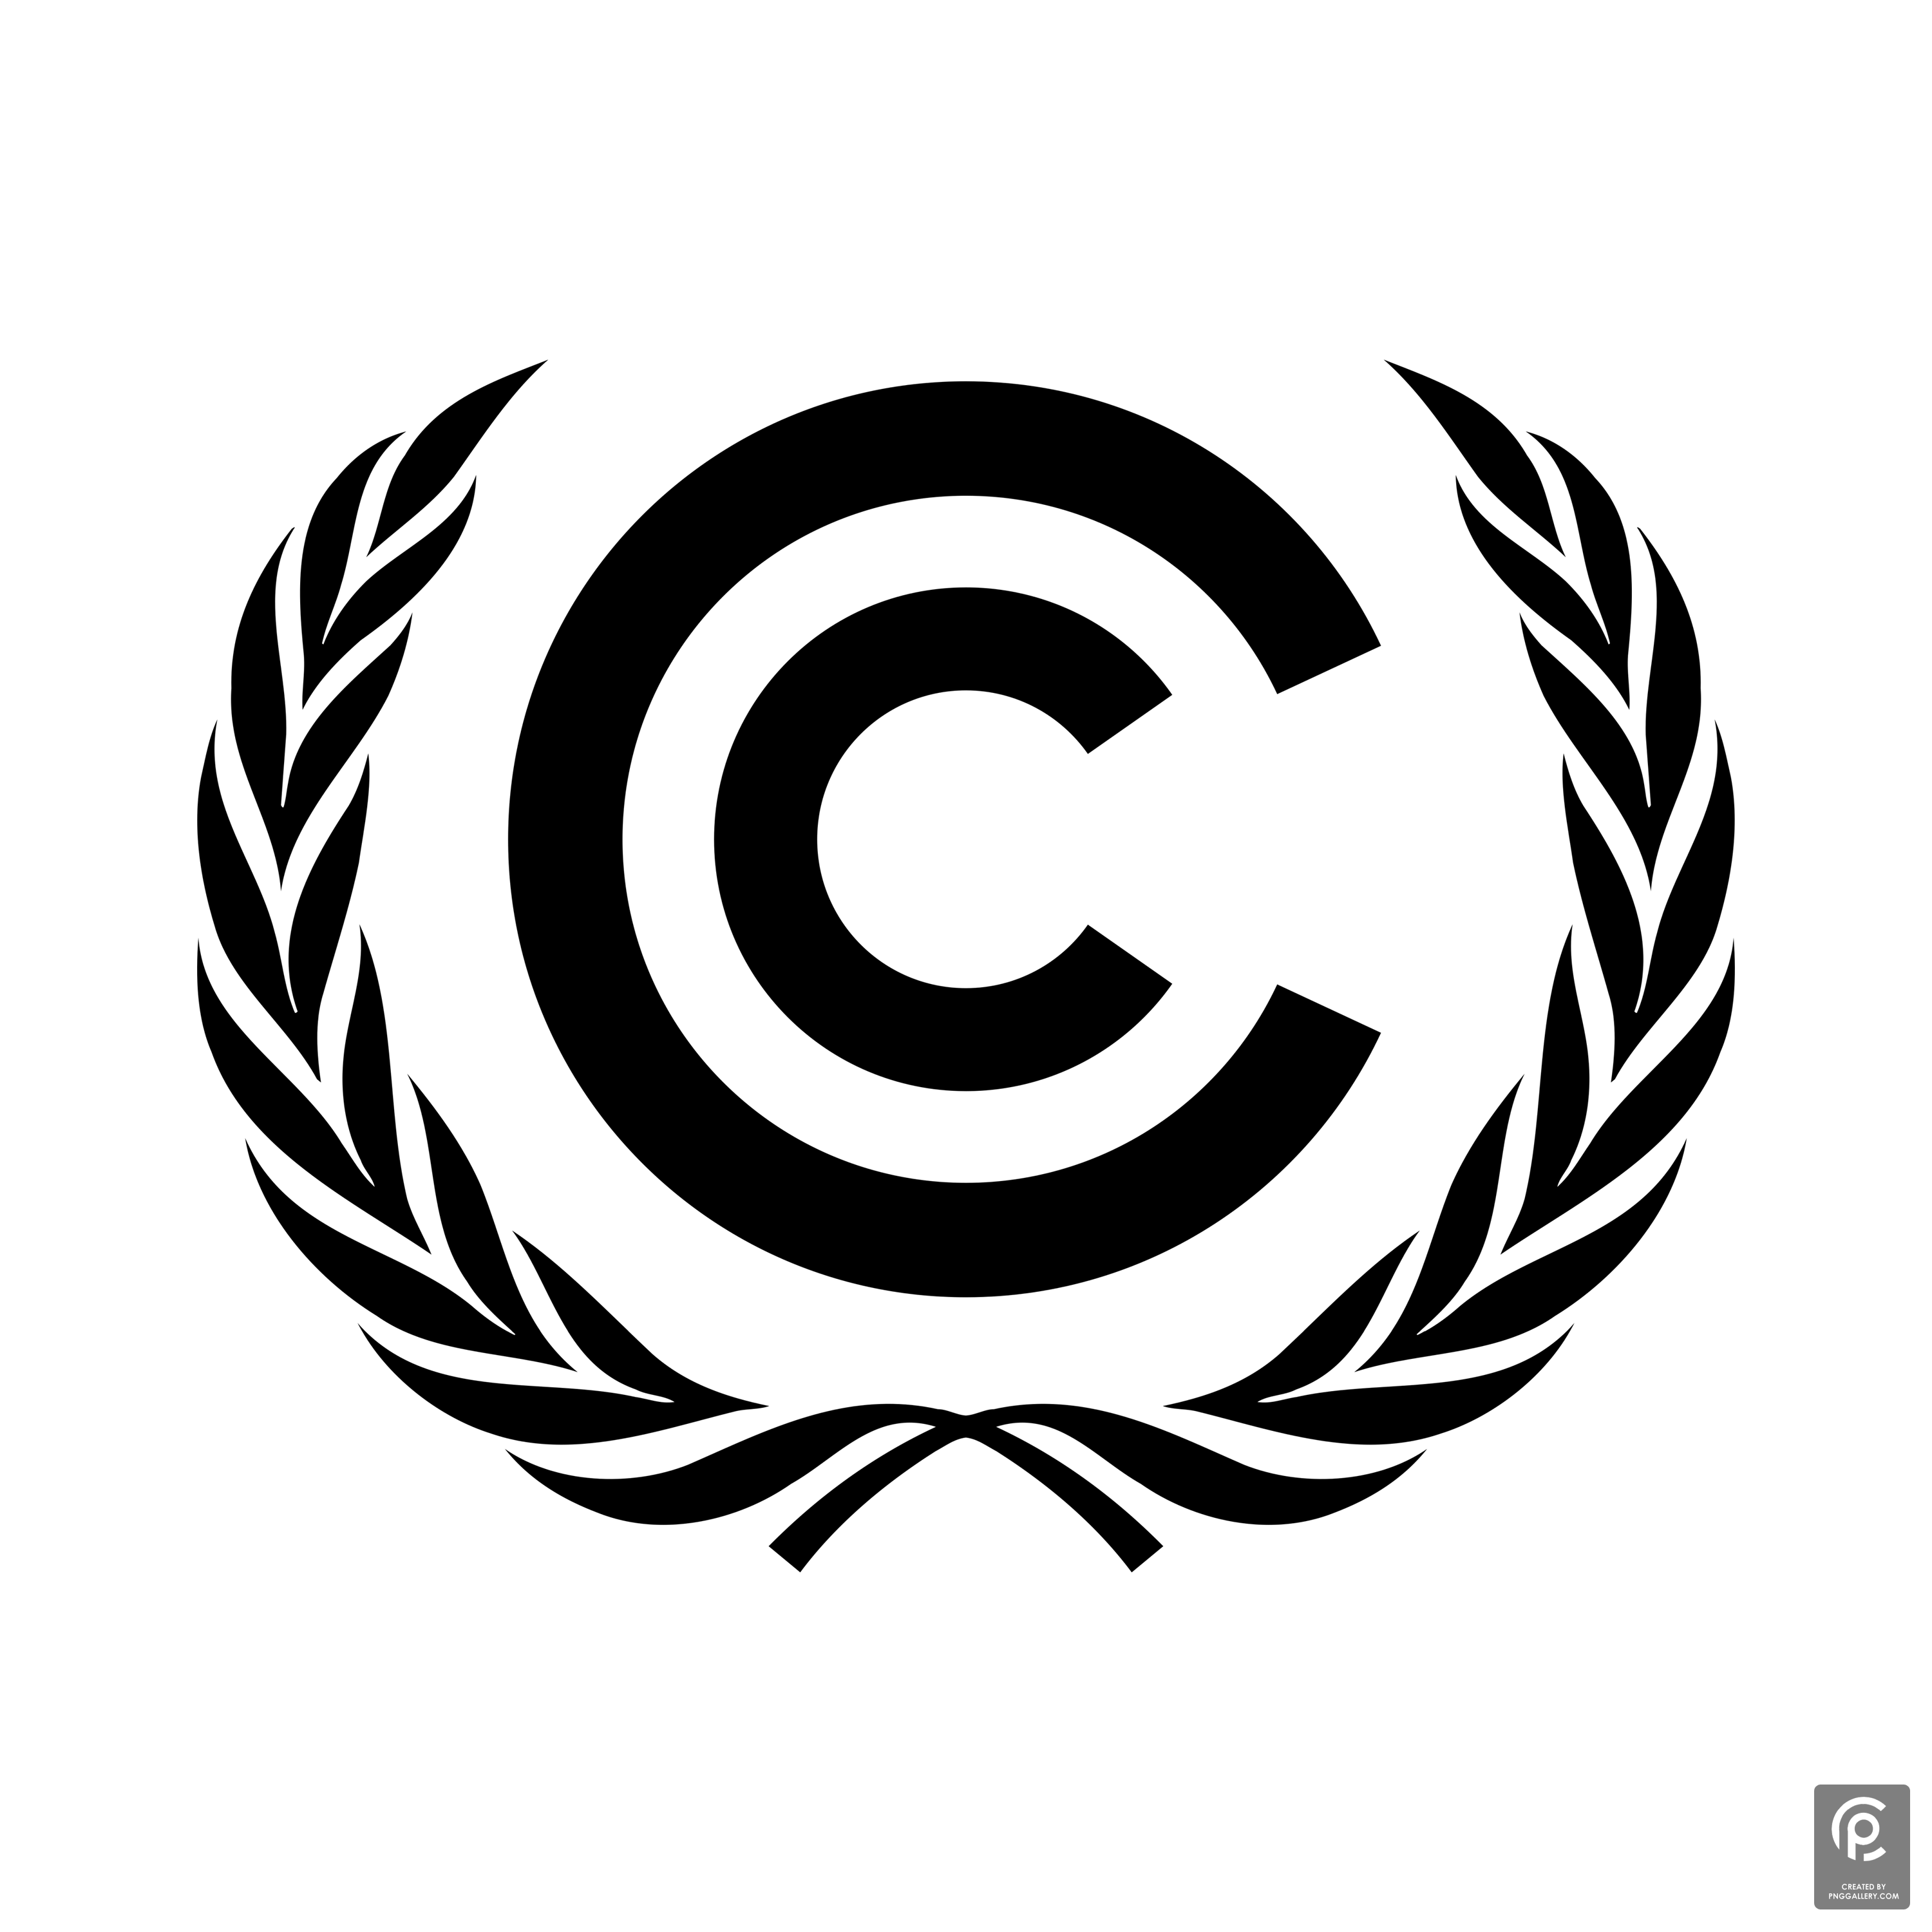 United Nations Climate Change Conference Logo Transparent Gallery